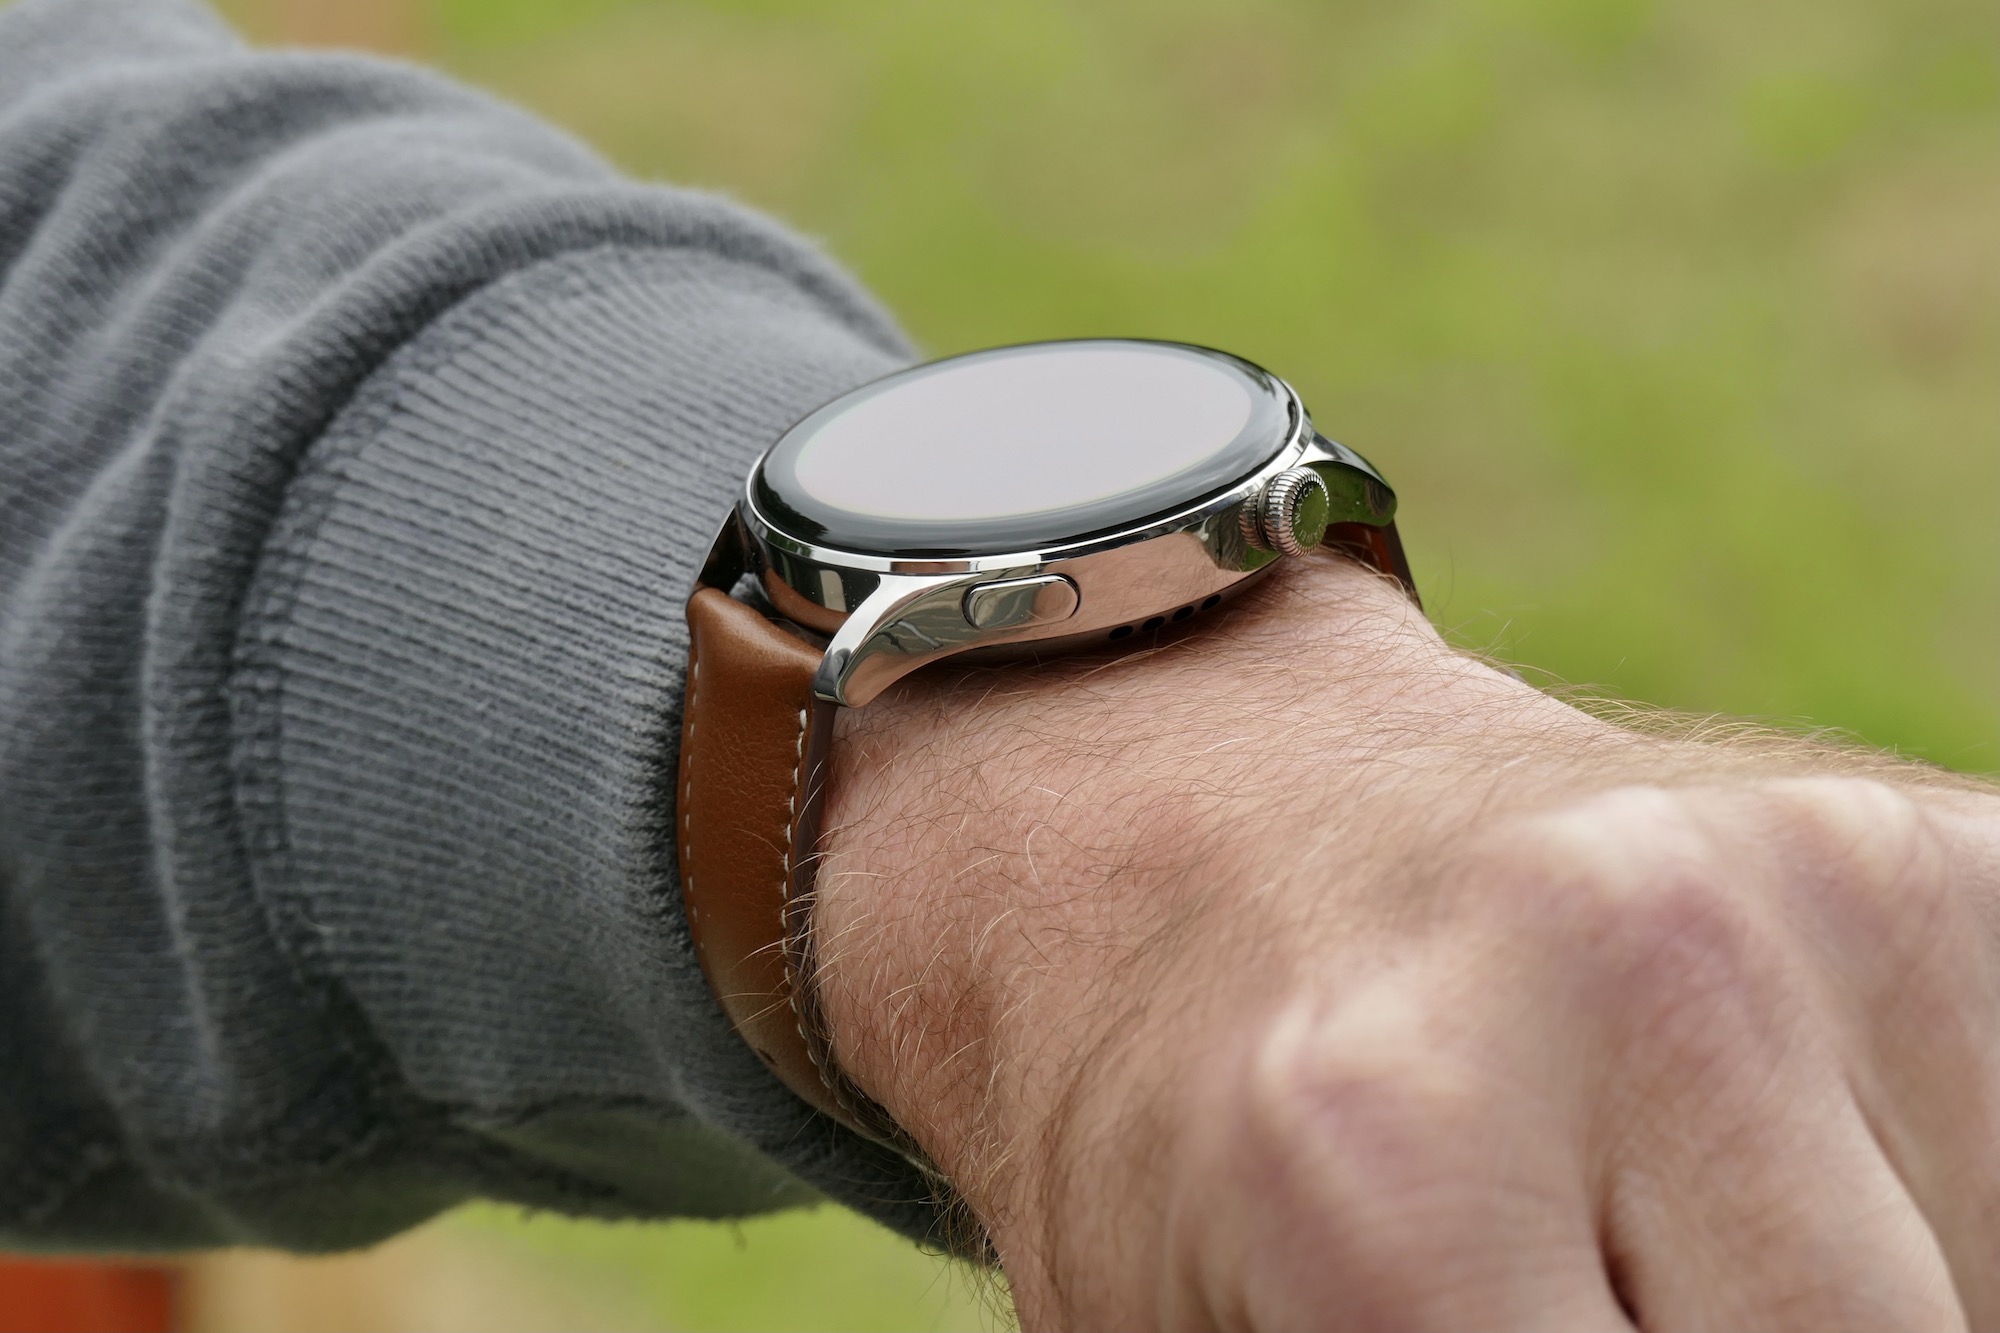 Huawei Watch 3 Review: Strong Commitment is Needed